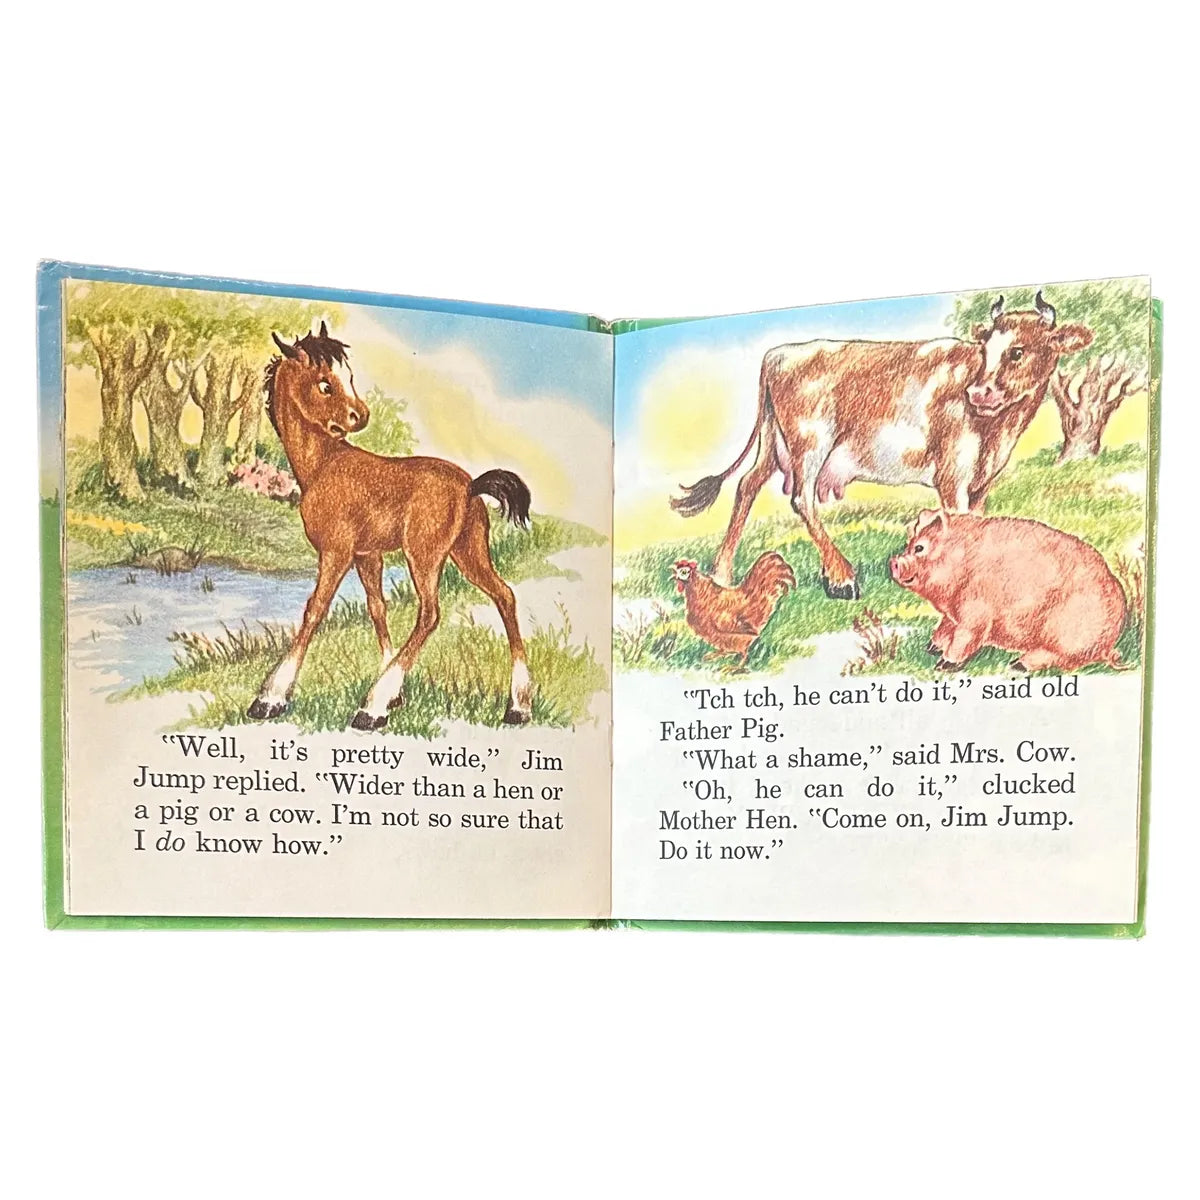 VINTAGE HORSE STORY BOOK PAIR (1960s) - Two (2) Children’s Books